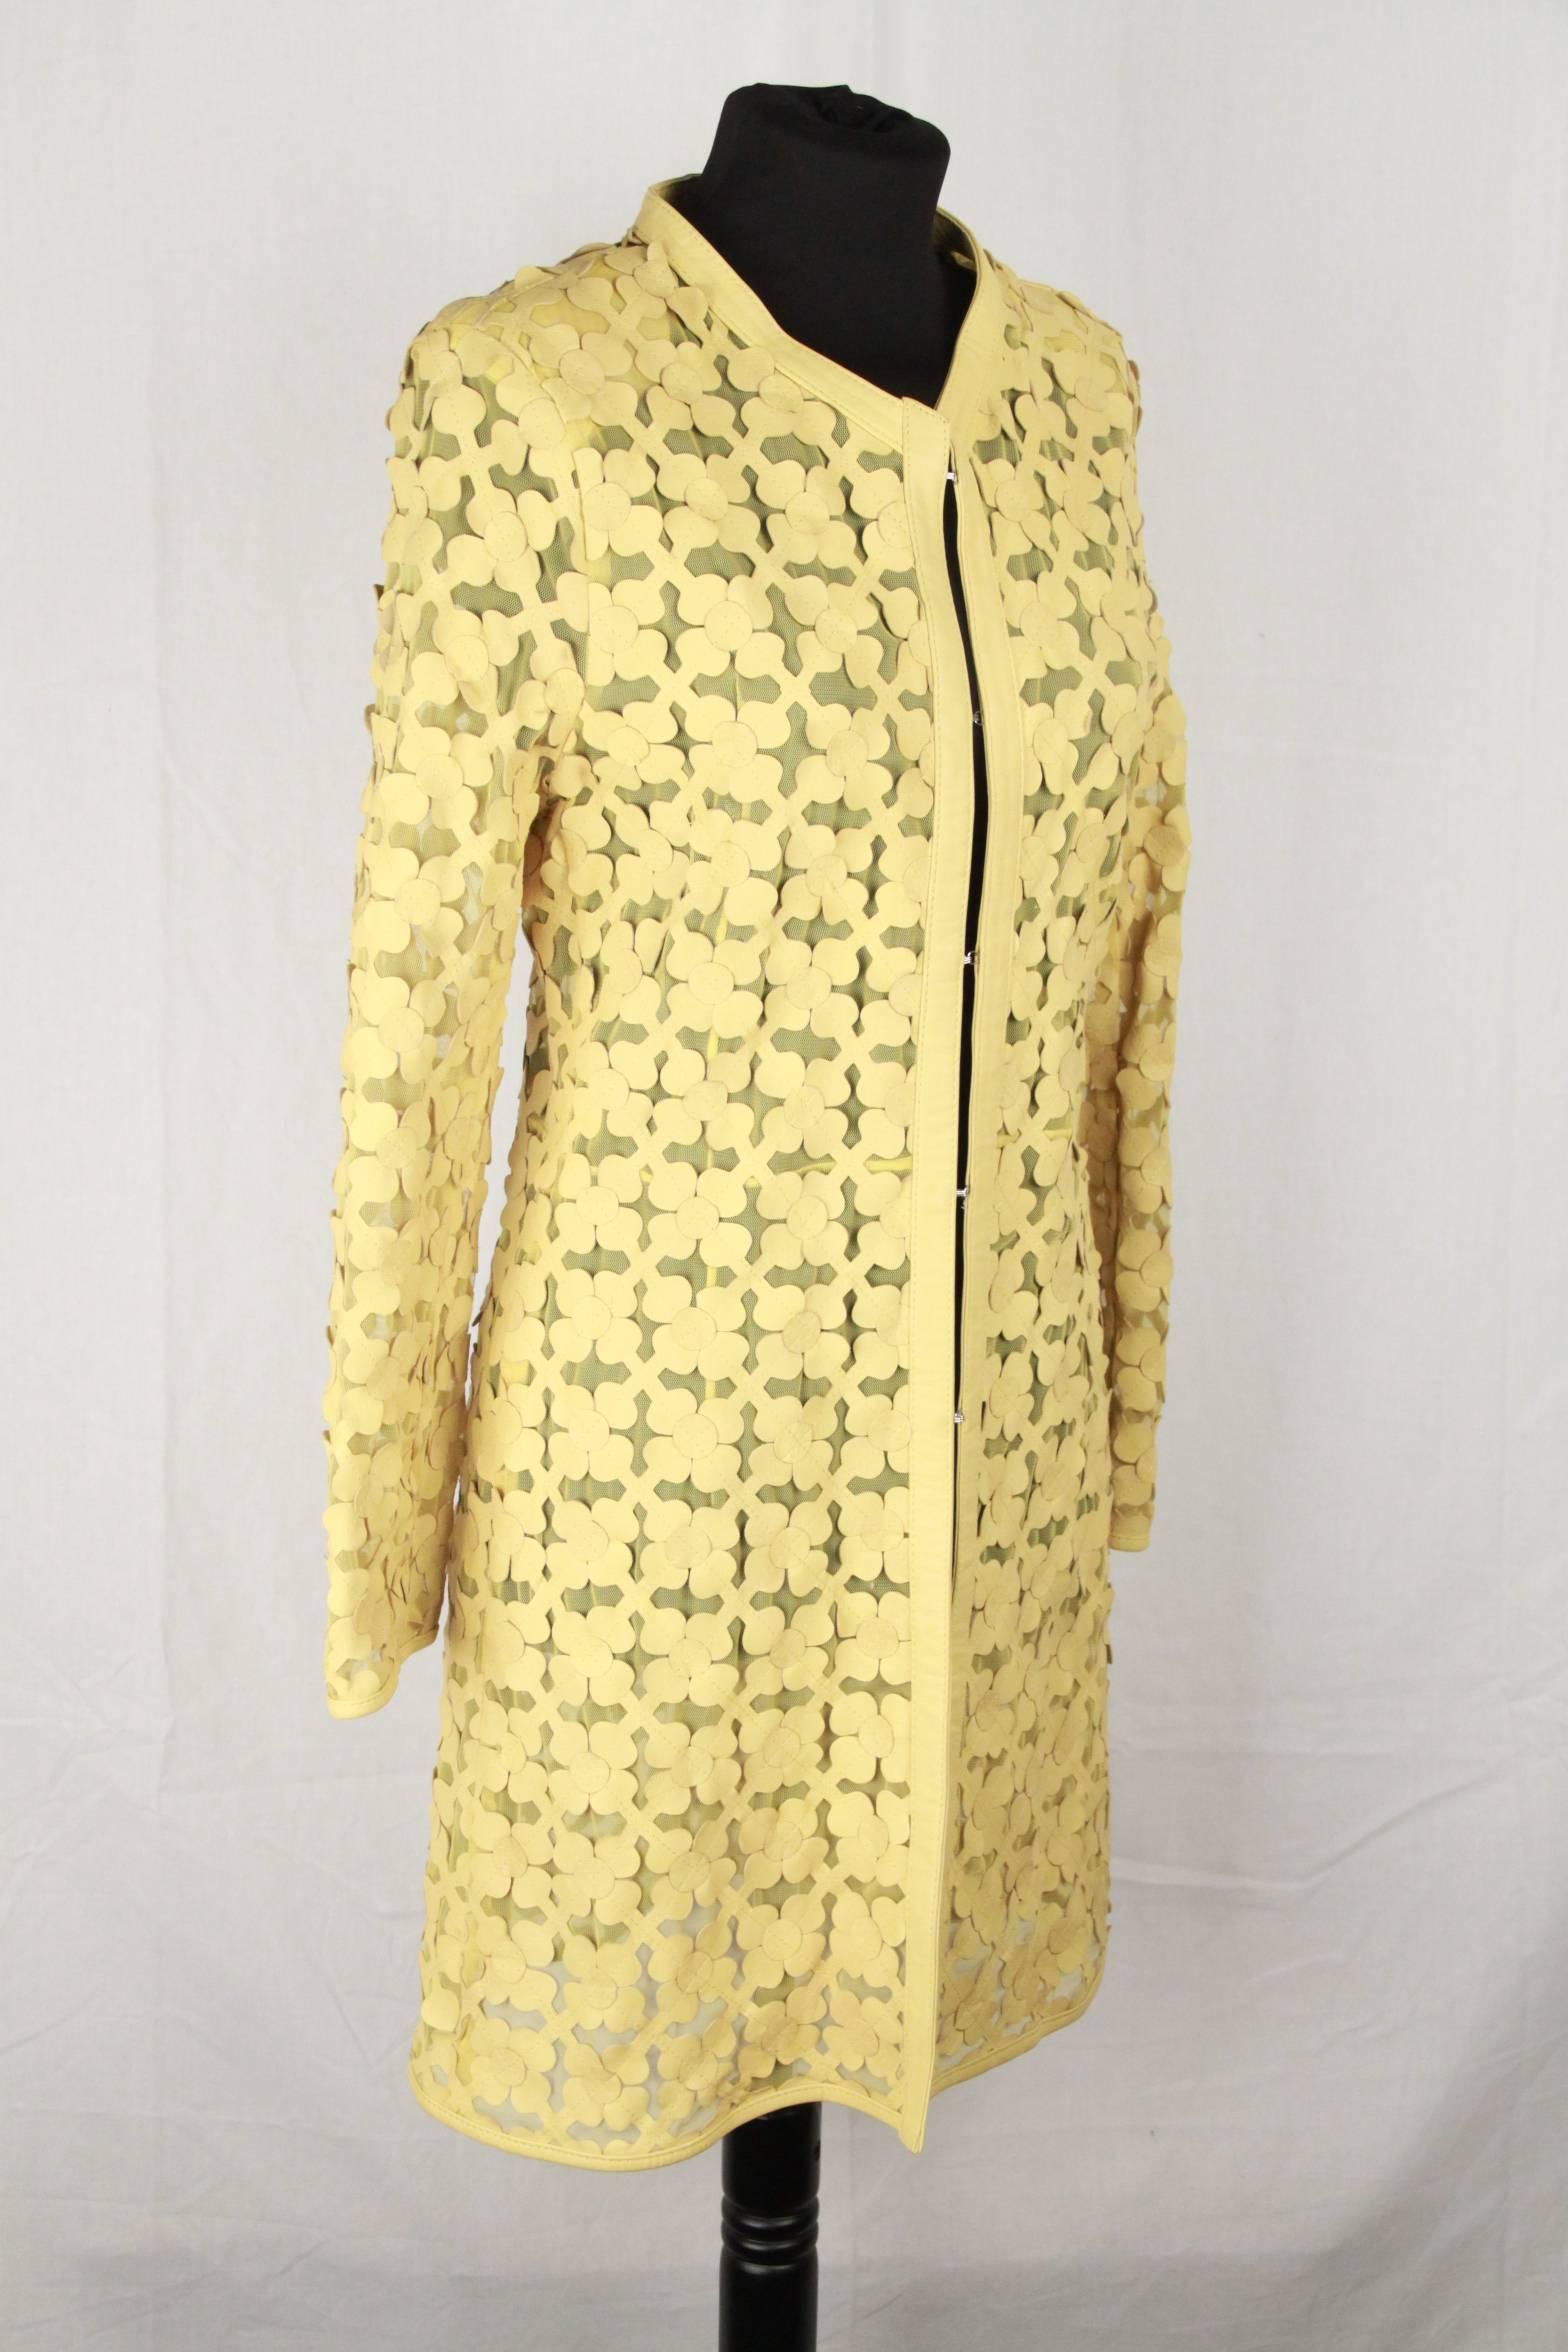  Yellow Flower leather Cardi-Coat 
- Round Collar
- Single-Breasted
- No pockets
- front hook closure
- Straight hem 